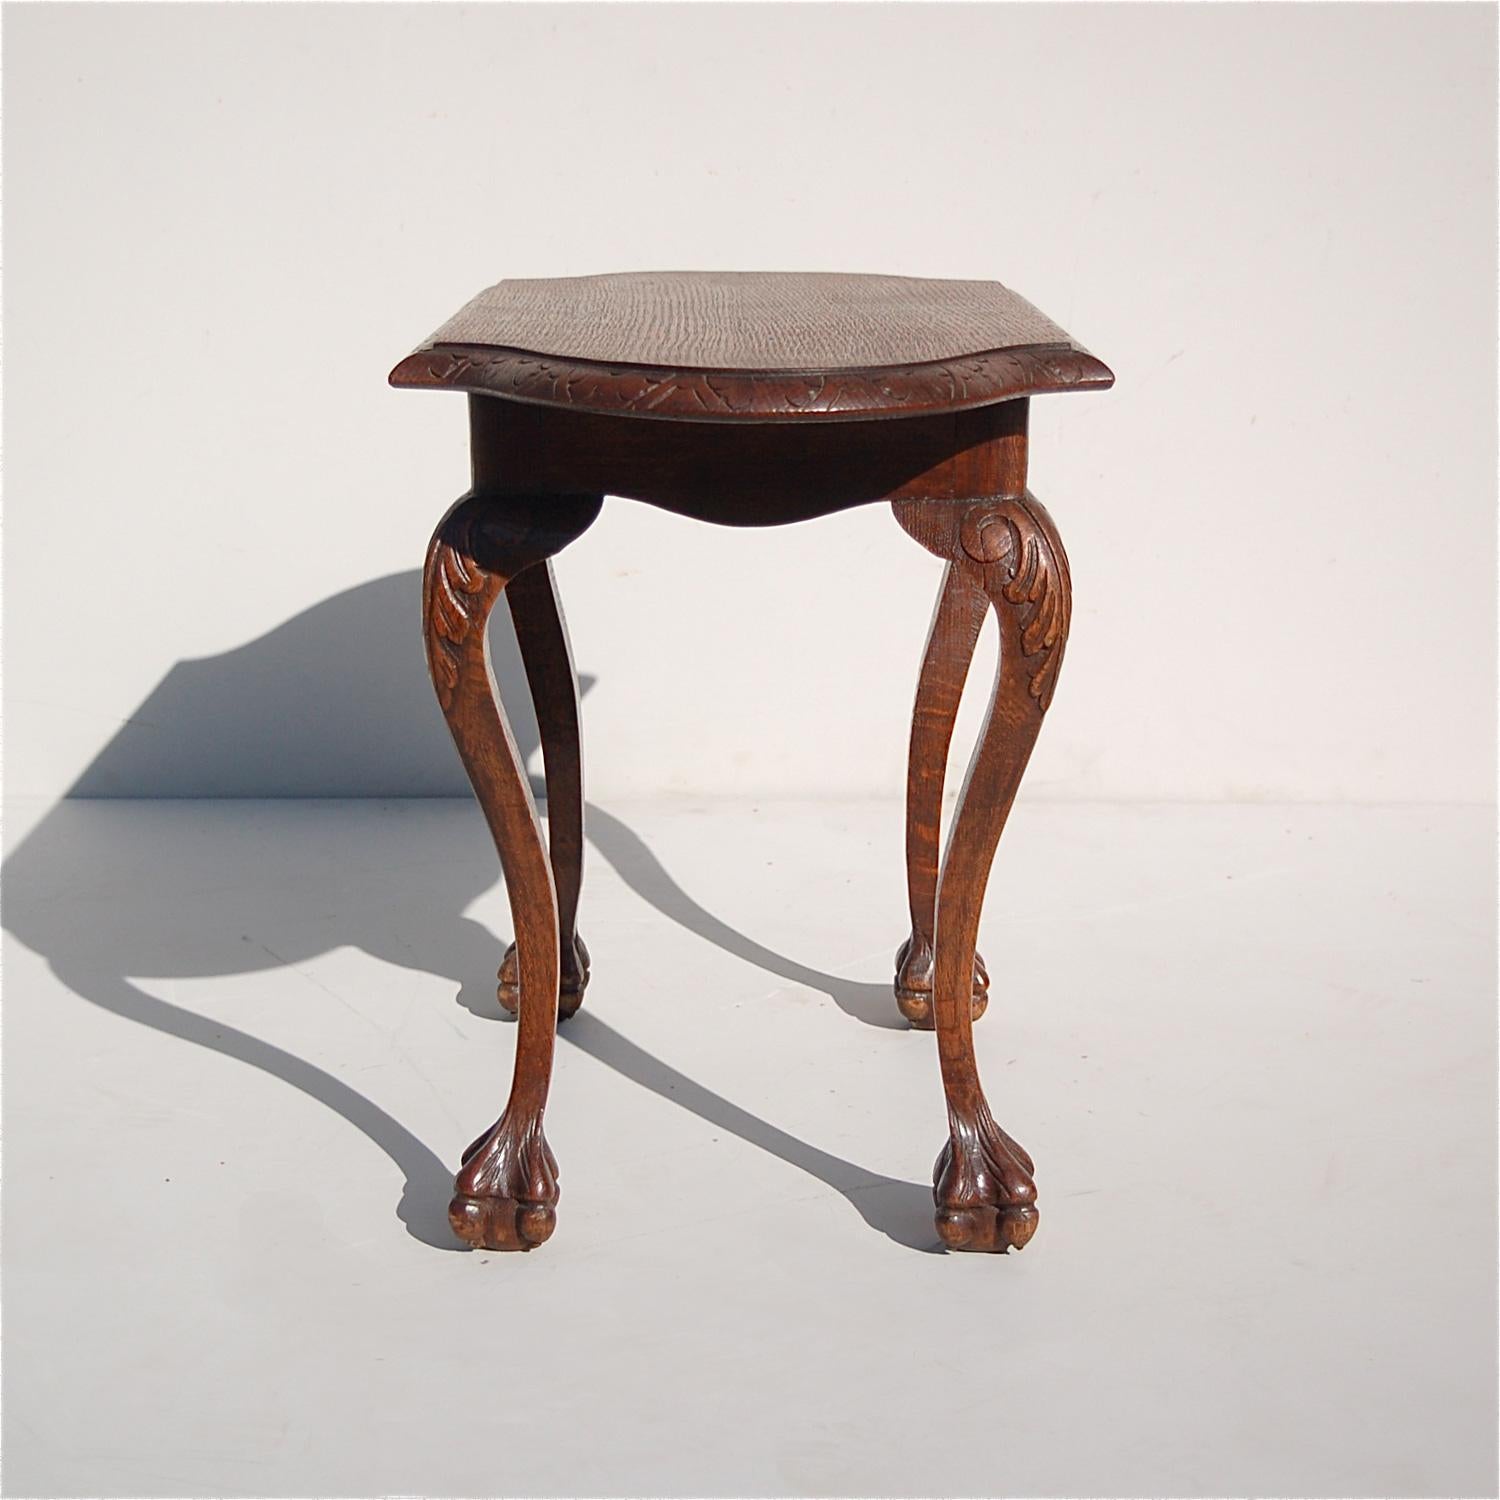 Delicately proportioned, low side table in the Chippendale style which combines usefulness with elegance. The table is made from solid oak. It has a rectangular top with scalloped or curved corners and lightly carved edging. The top is supported by